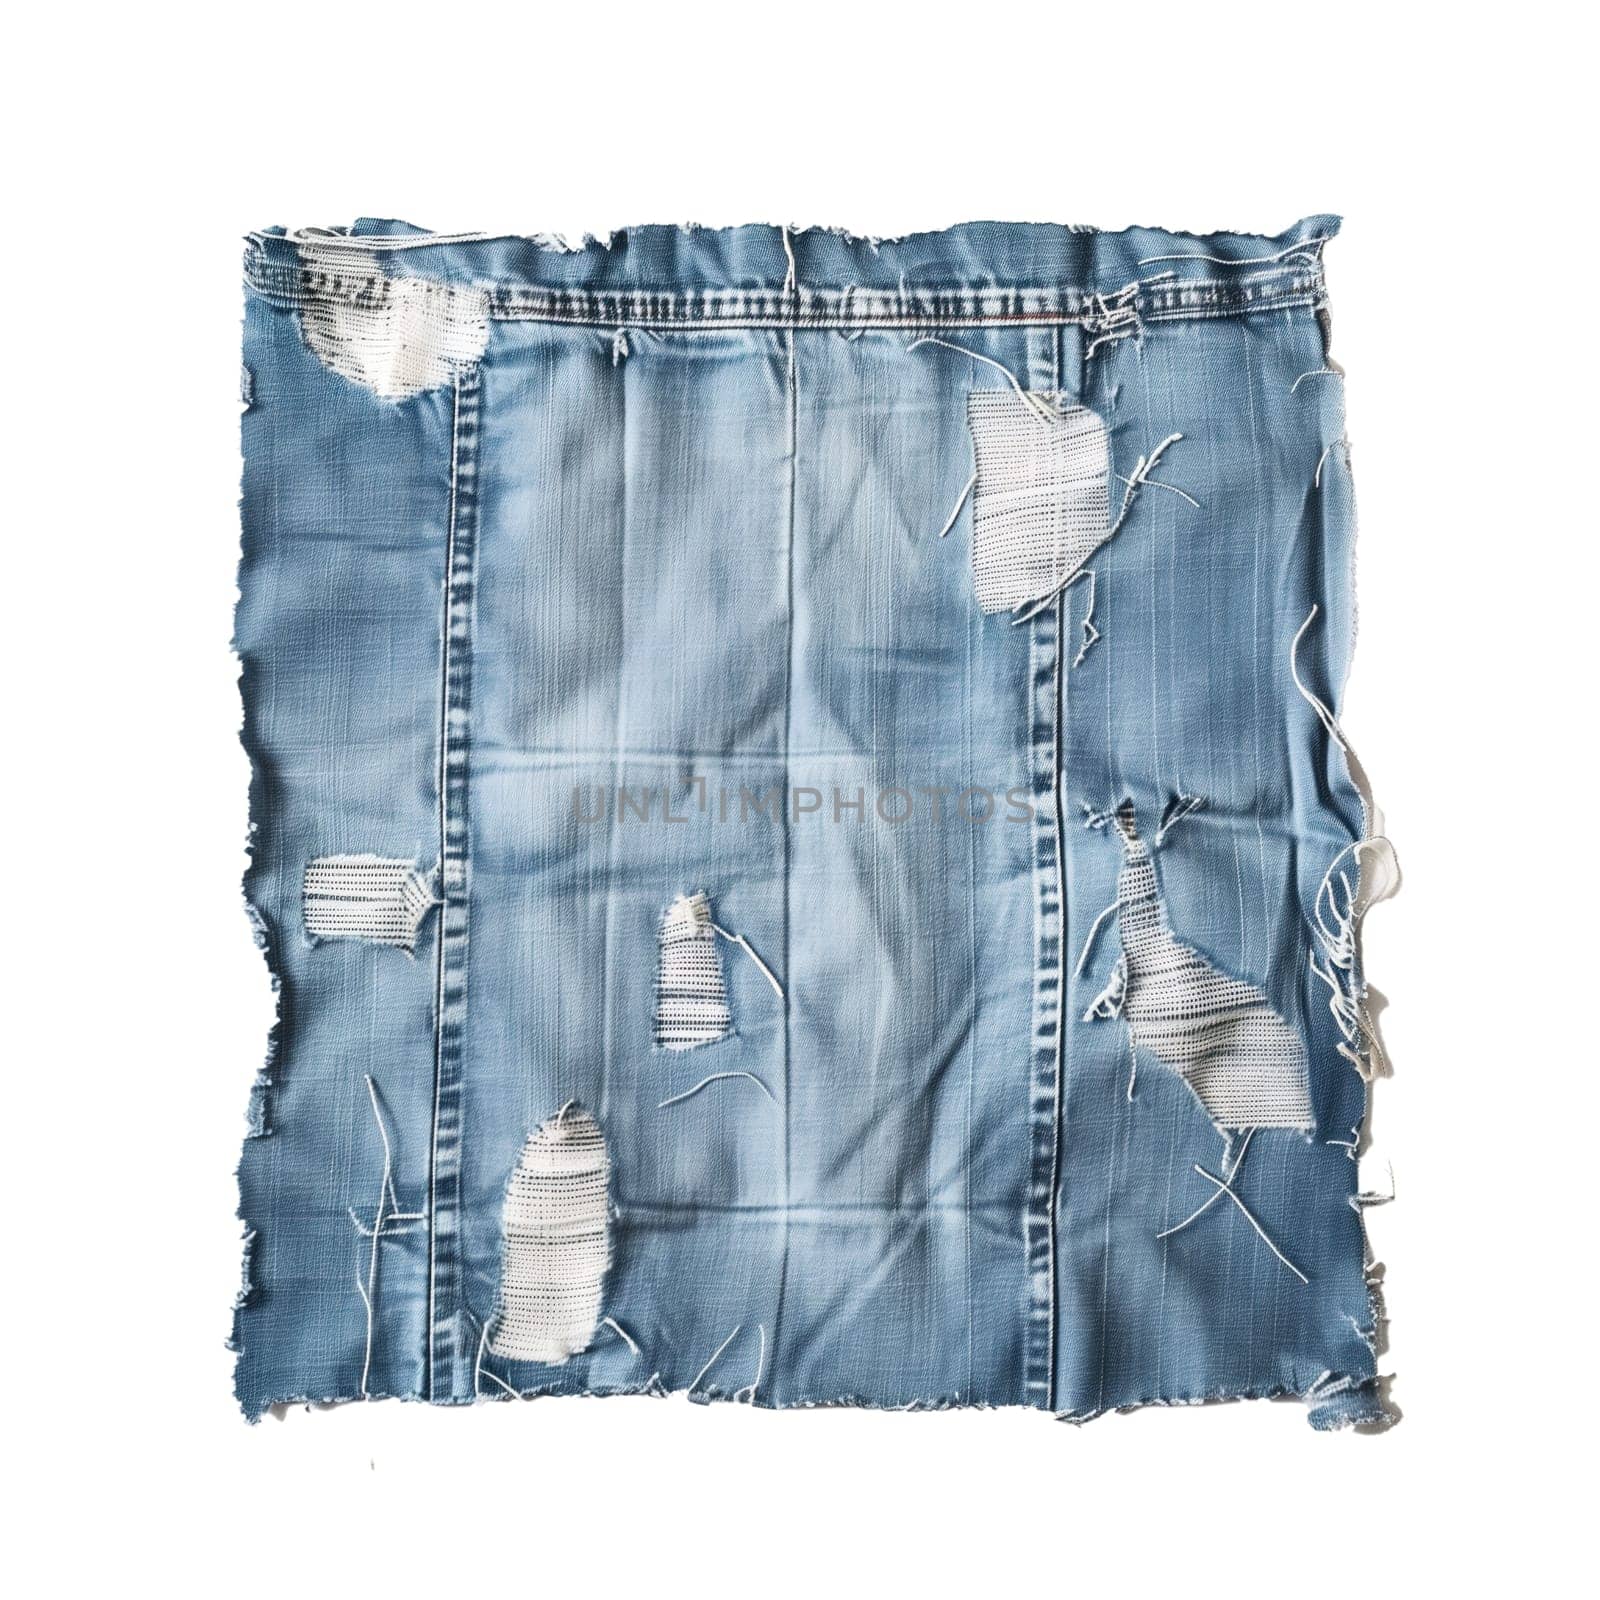 Ragged jeans square cloth piece by Dustick